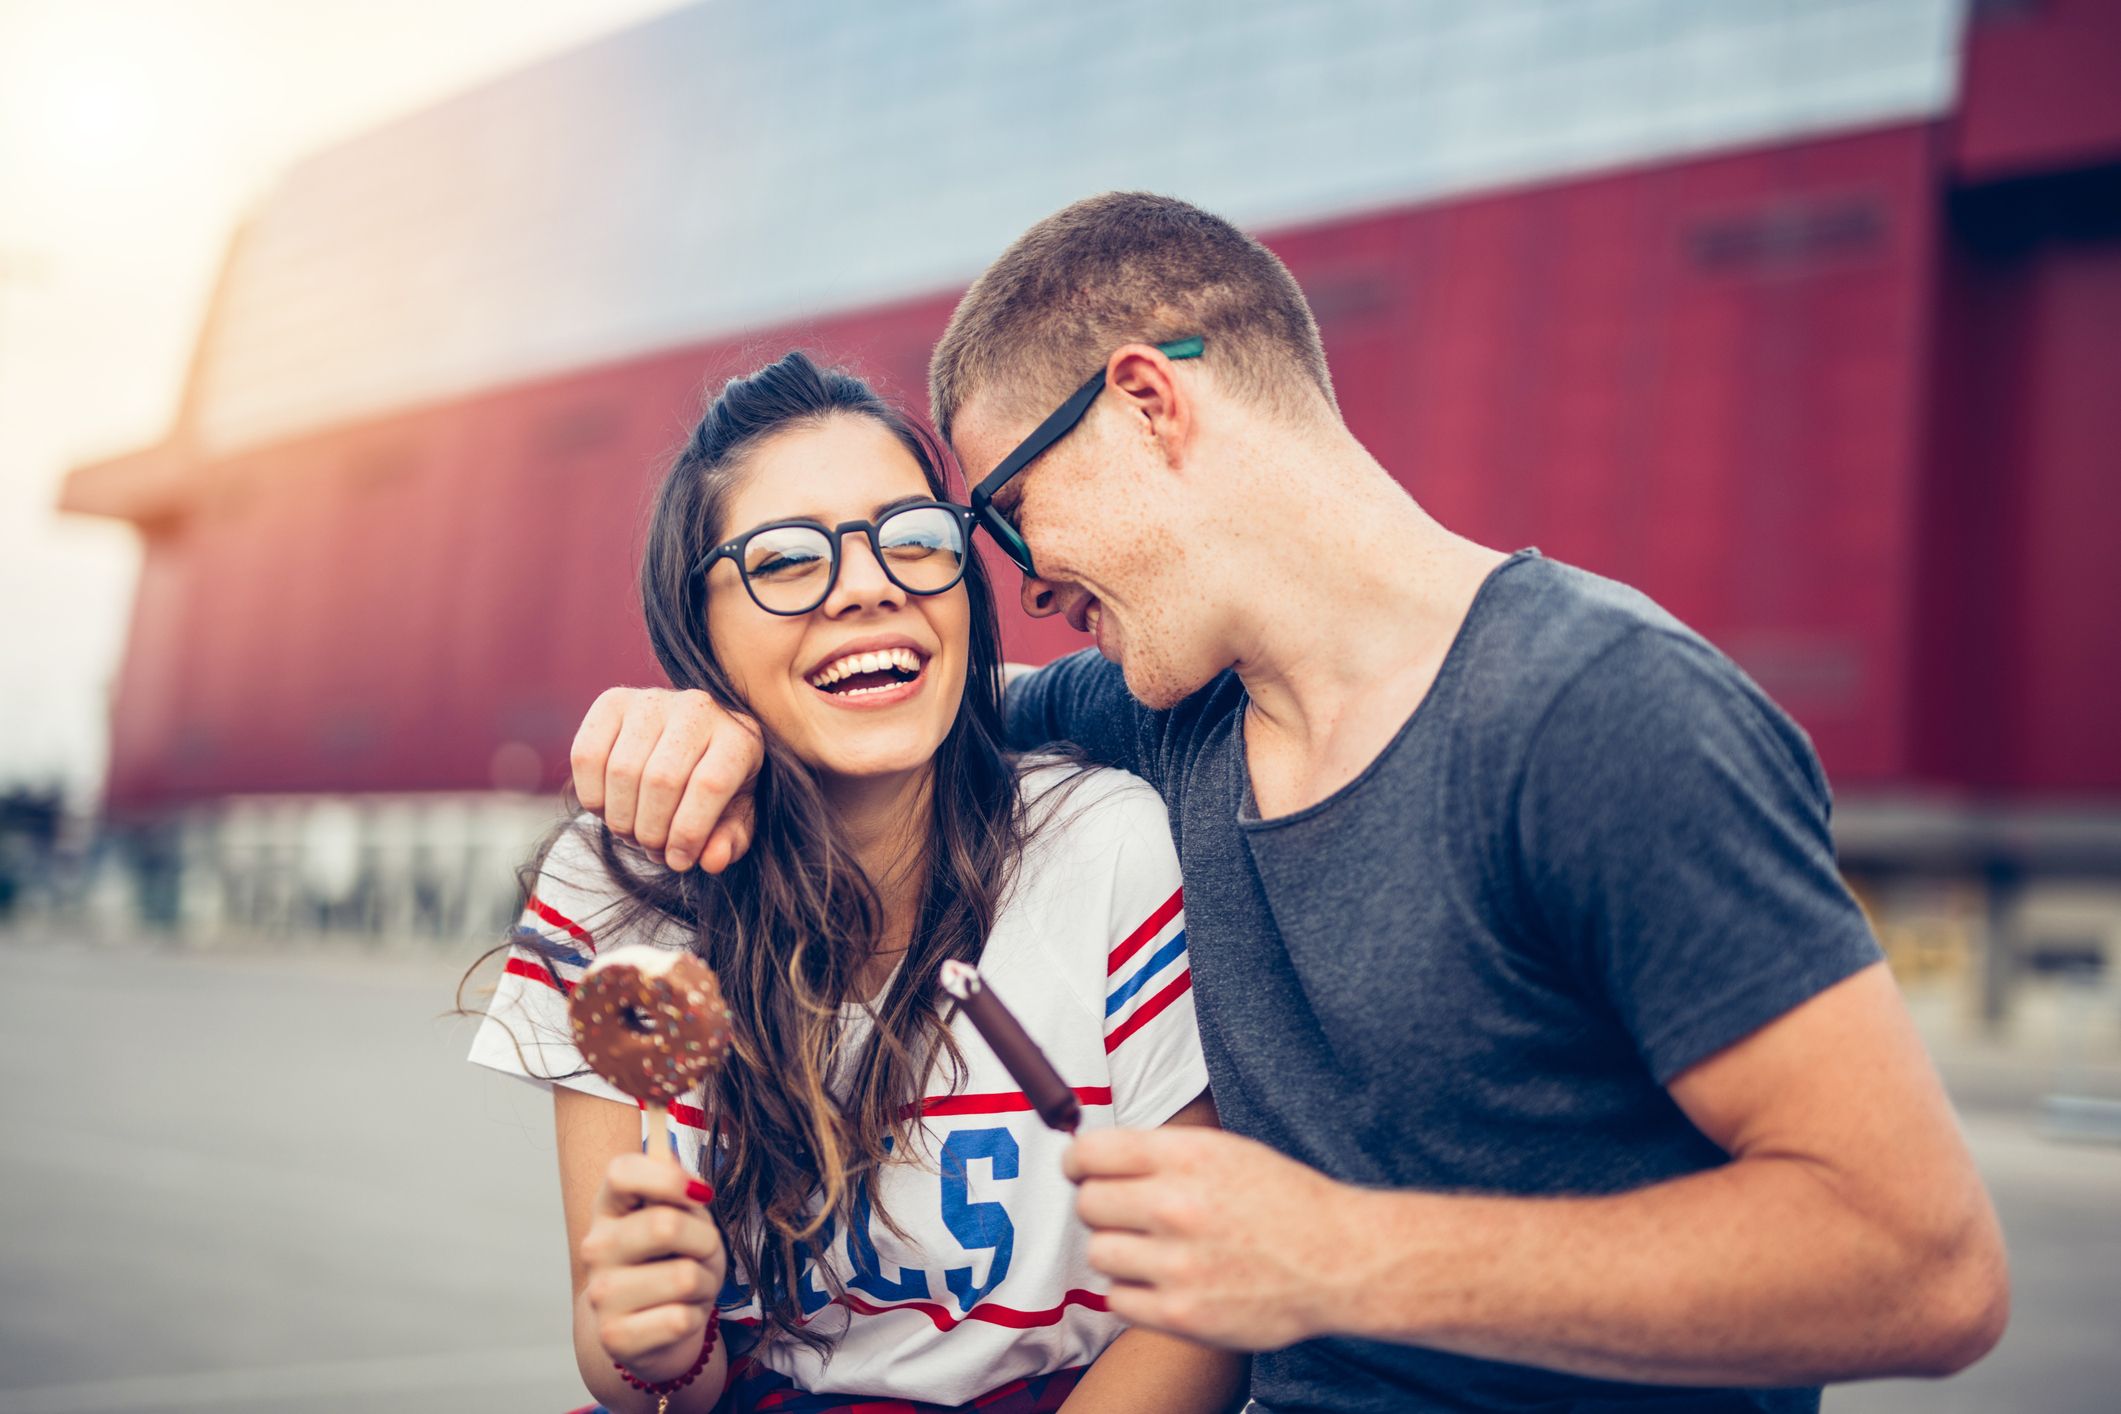 30 Best Summer Date Ideas For Teens - Perfect Summer Dates to Go On